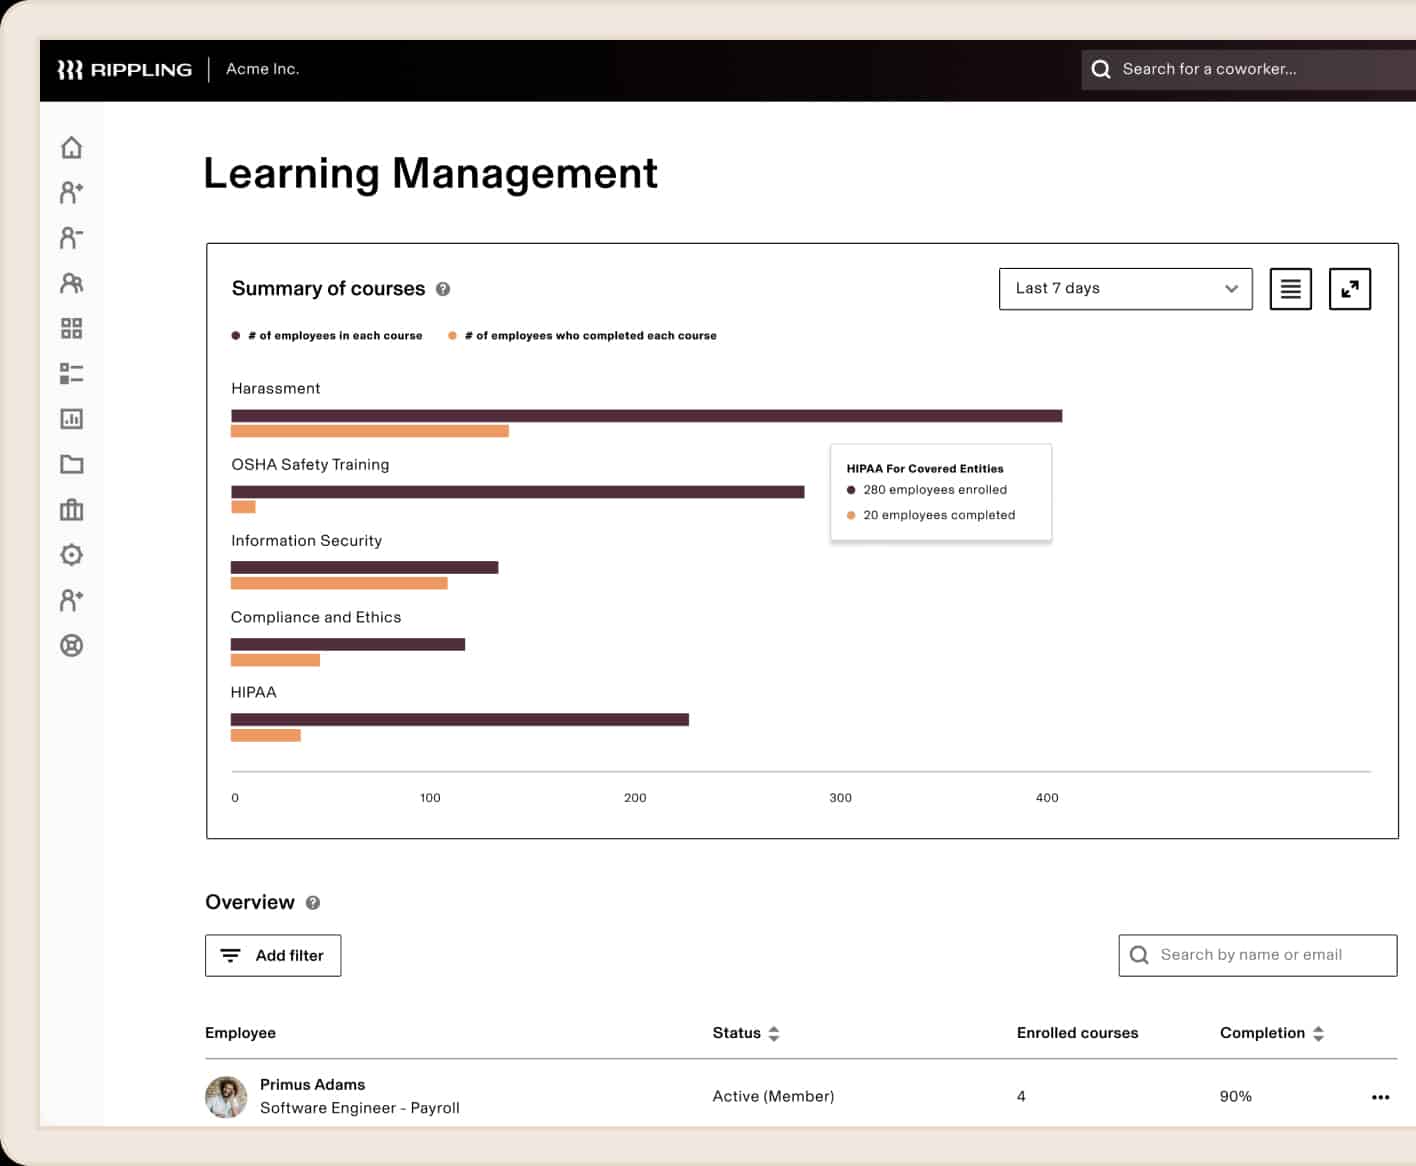 A sample image of Rippling Learning Management page where to find summary of courses.